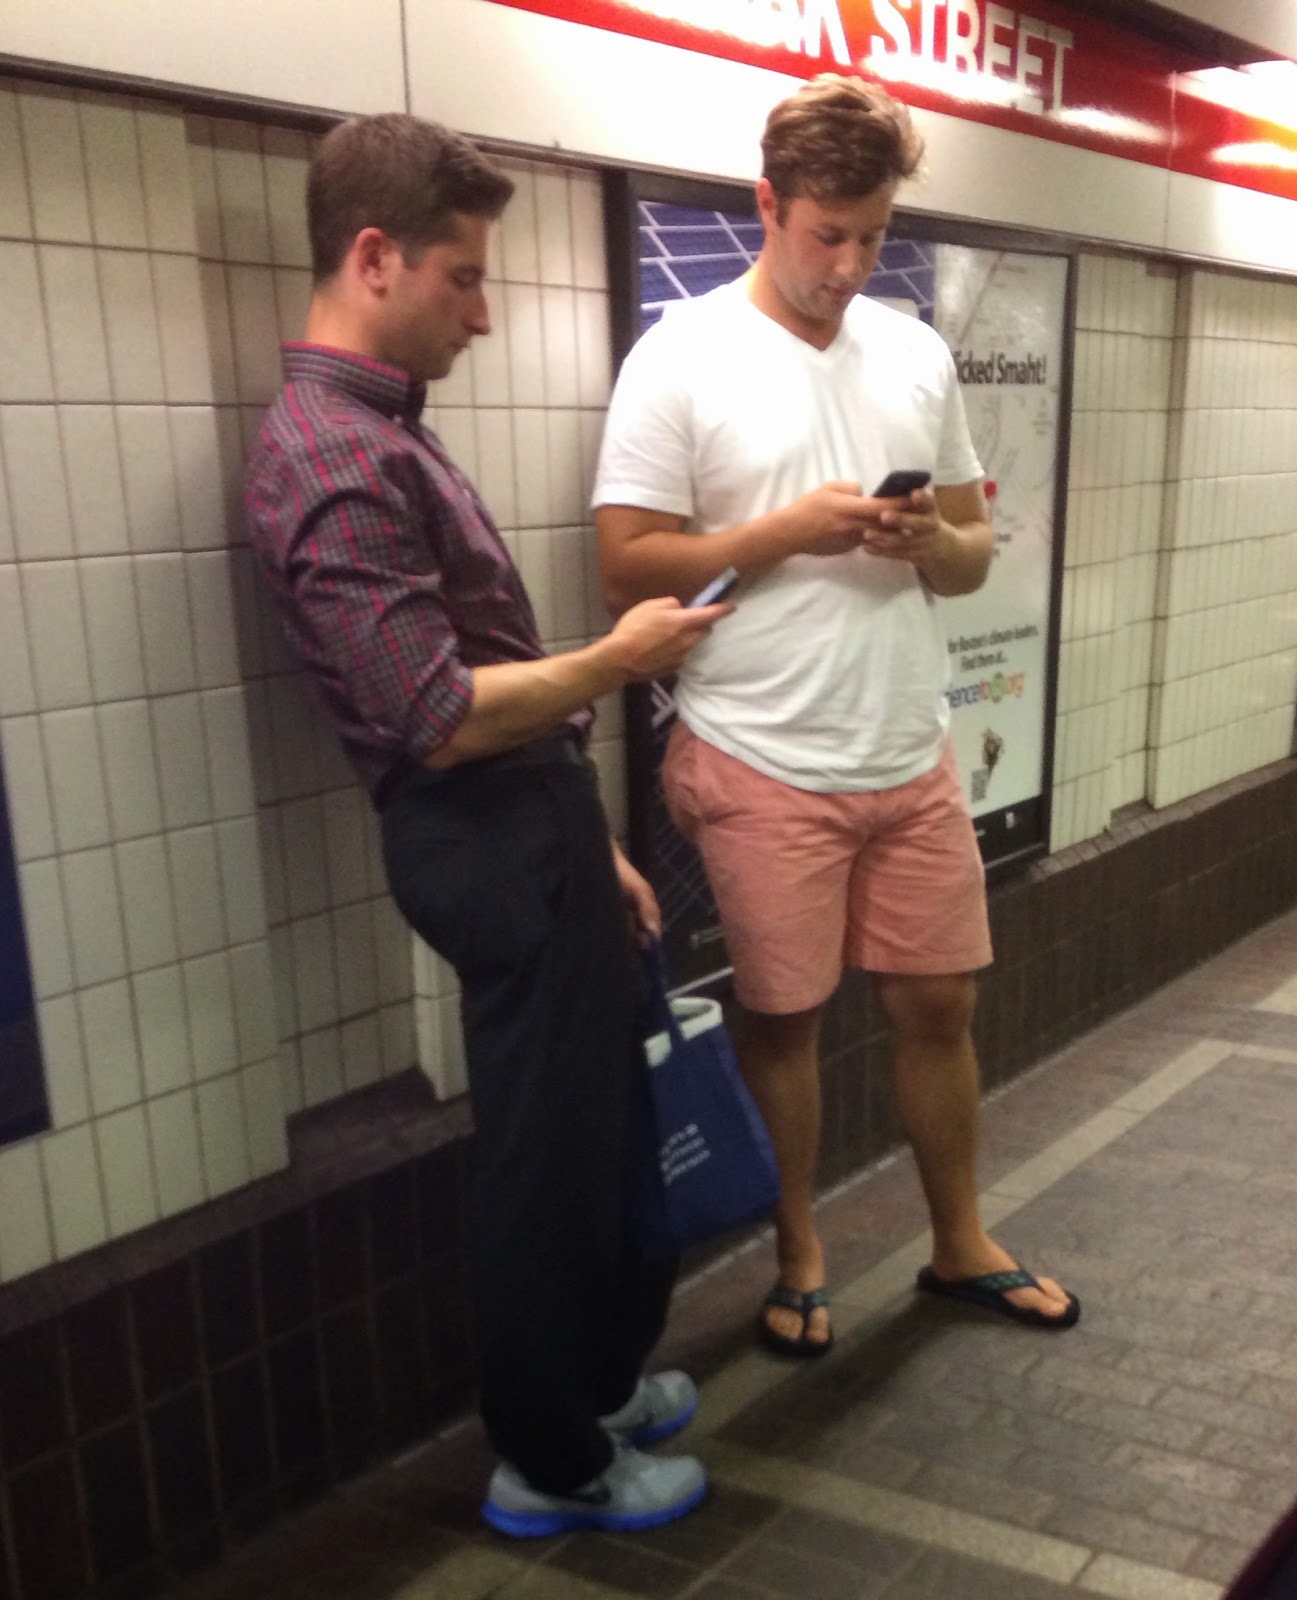 Hotties on the T!: Double Tuesday - Lean into Summer